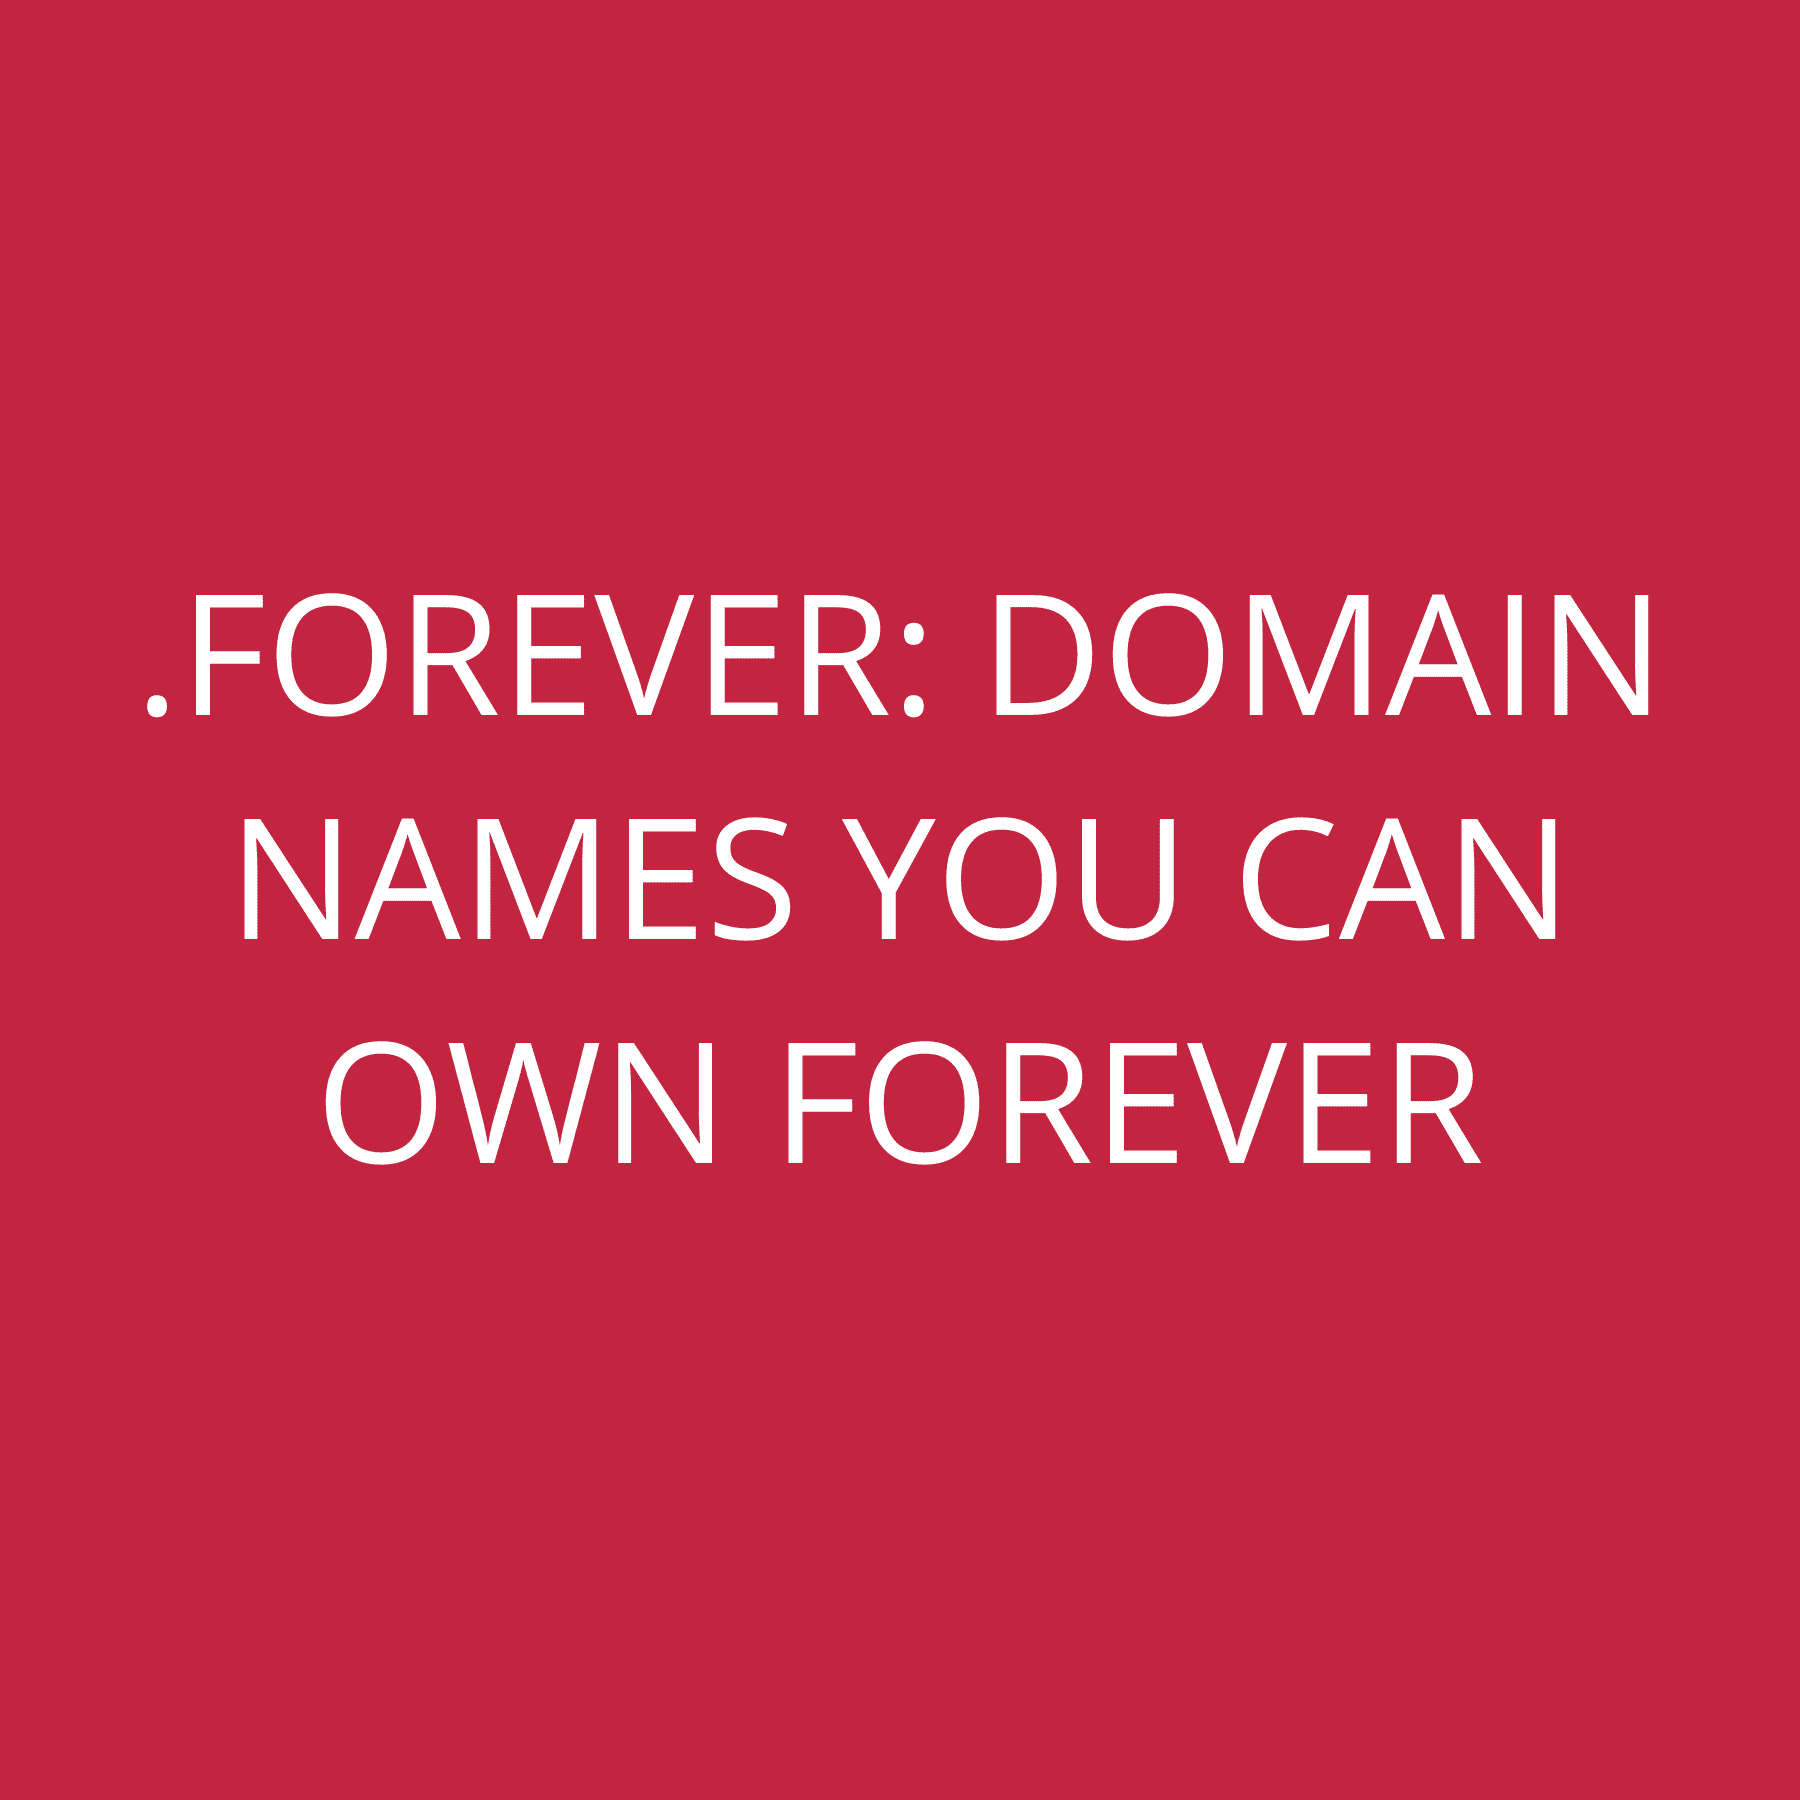 .forever: domain names you can own forever